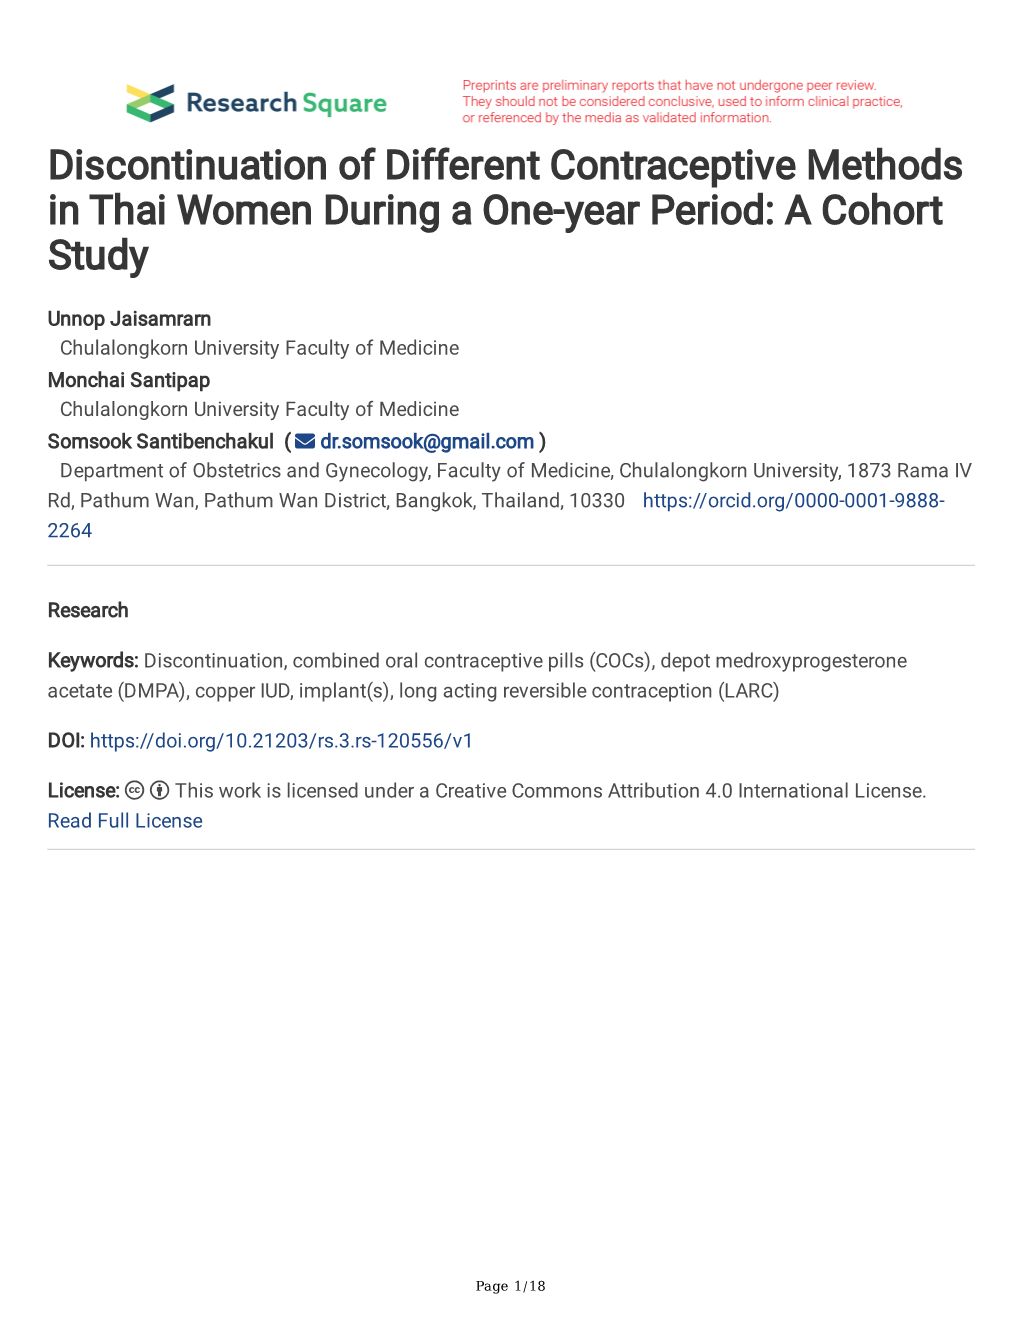 Discontinuation of Different Contraceptive Methods in Thai Women During a One-Year Period: a Cohort Study